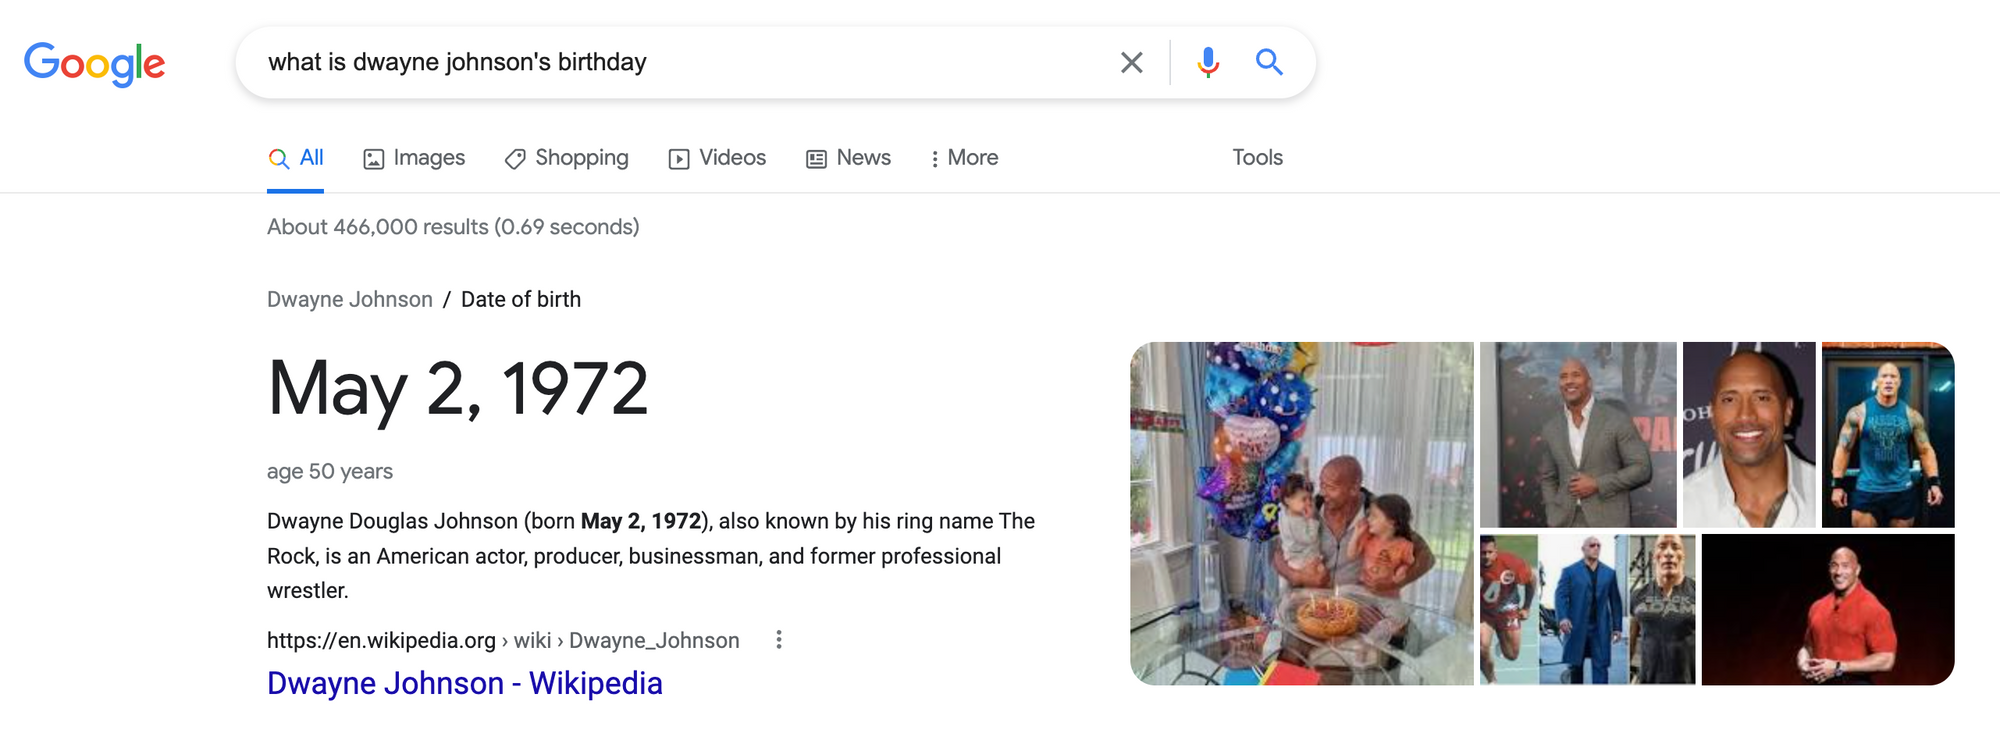 Google search results for celebrity birthday